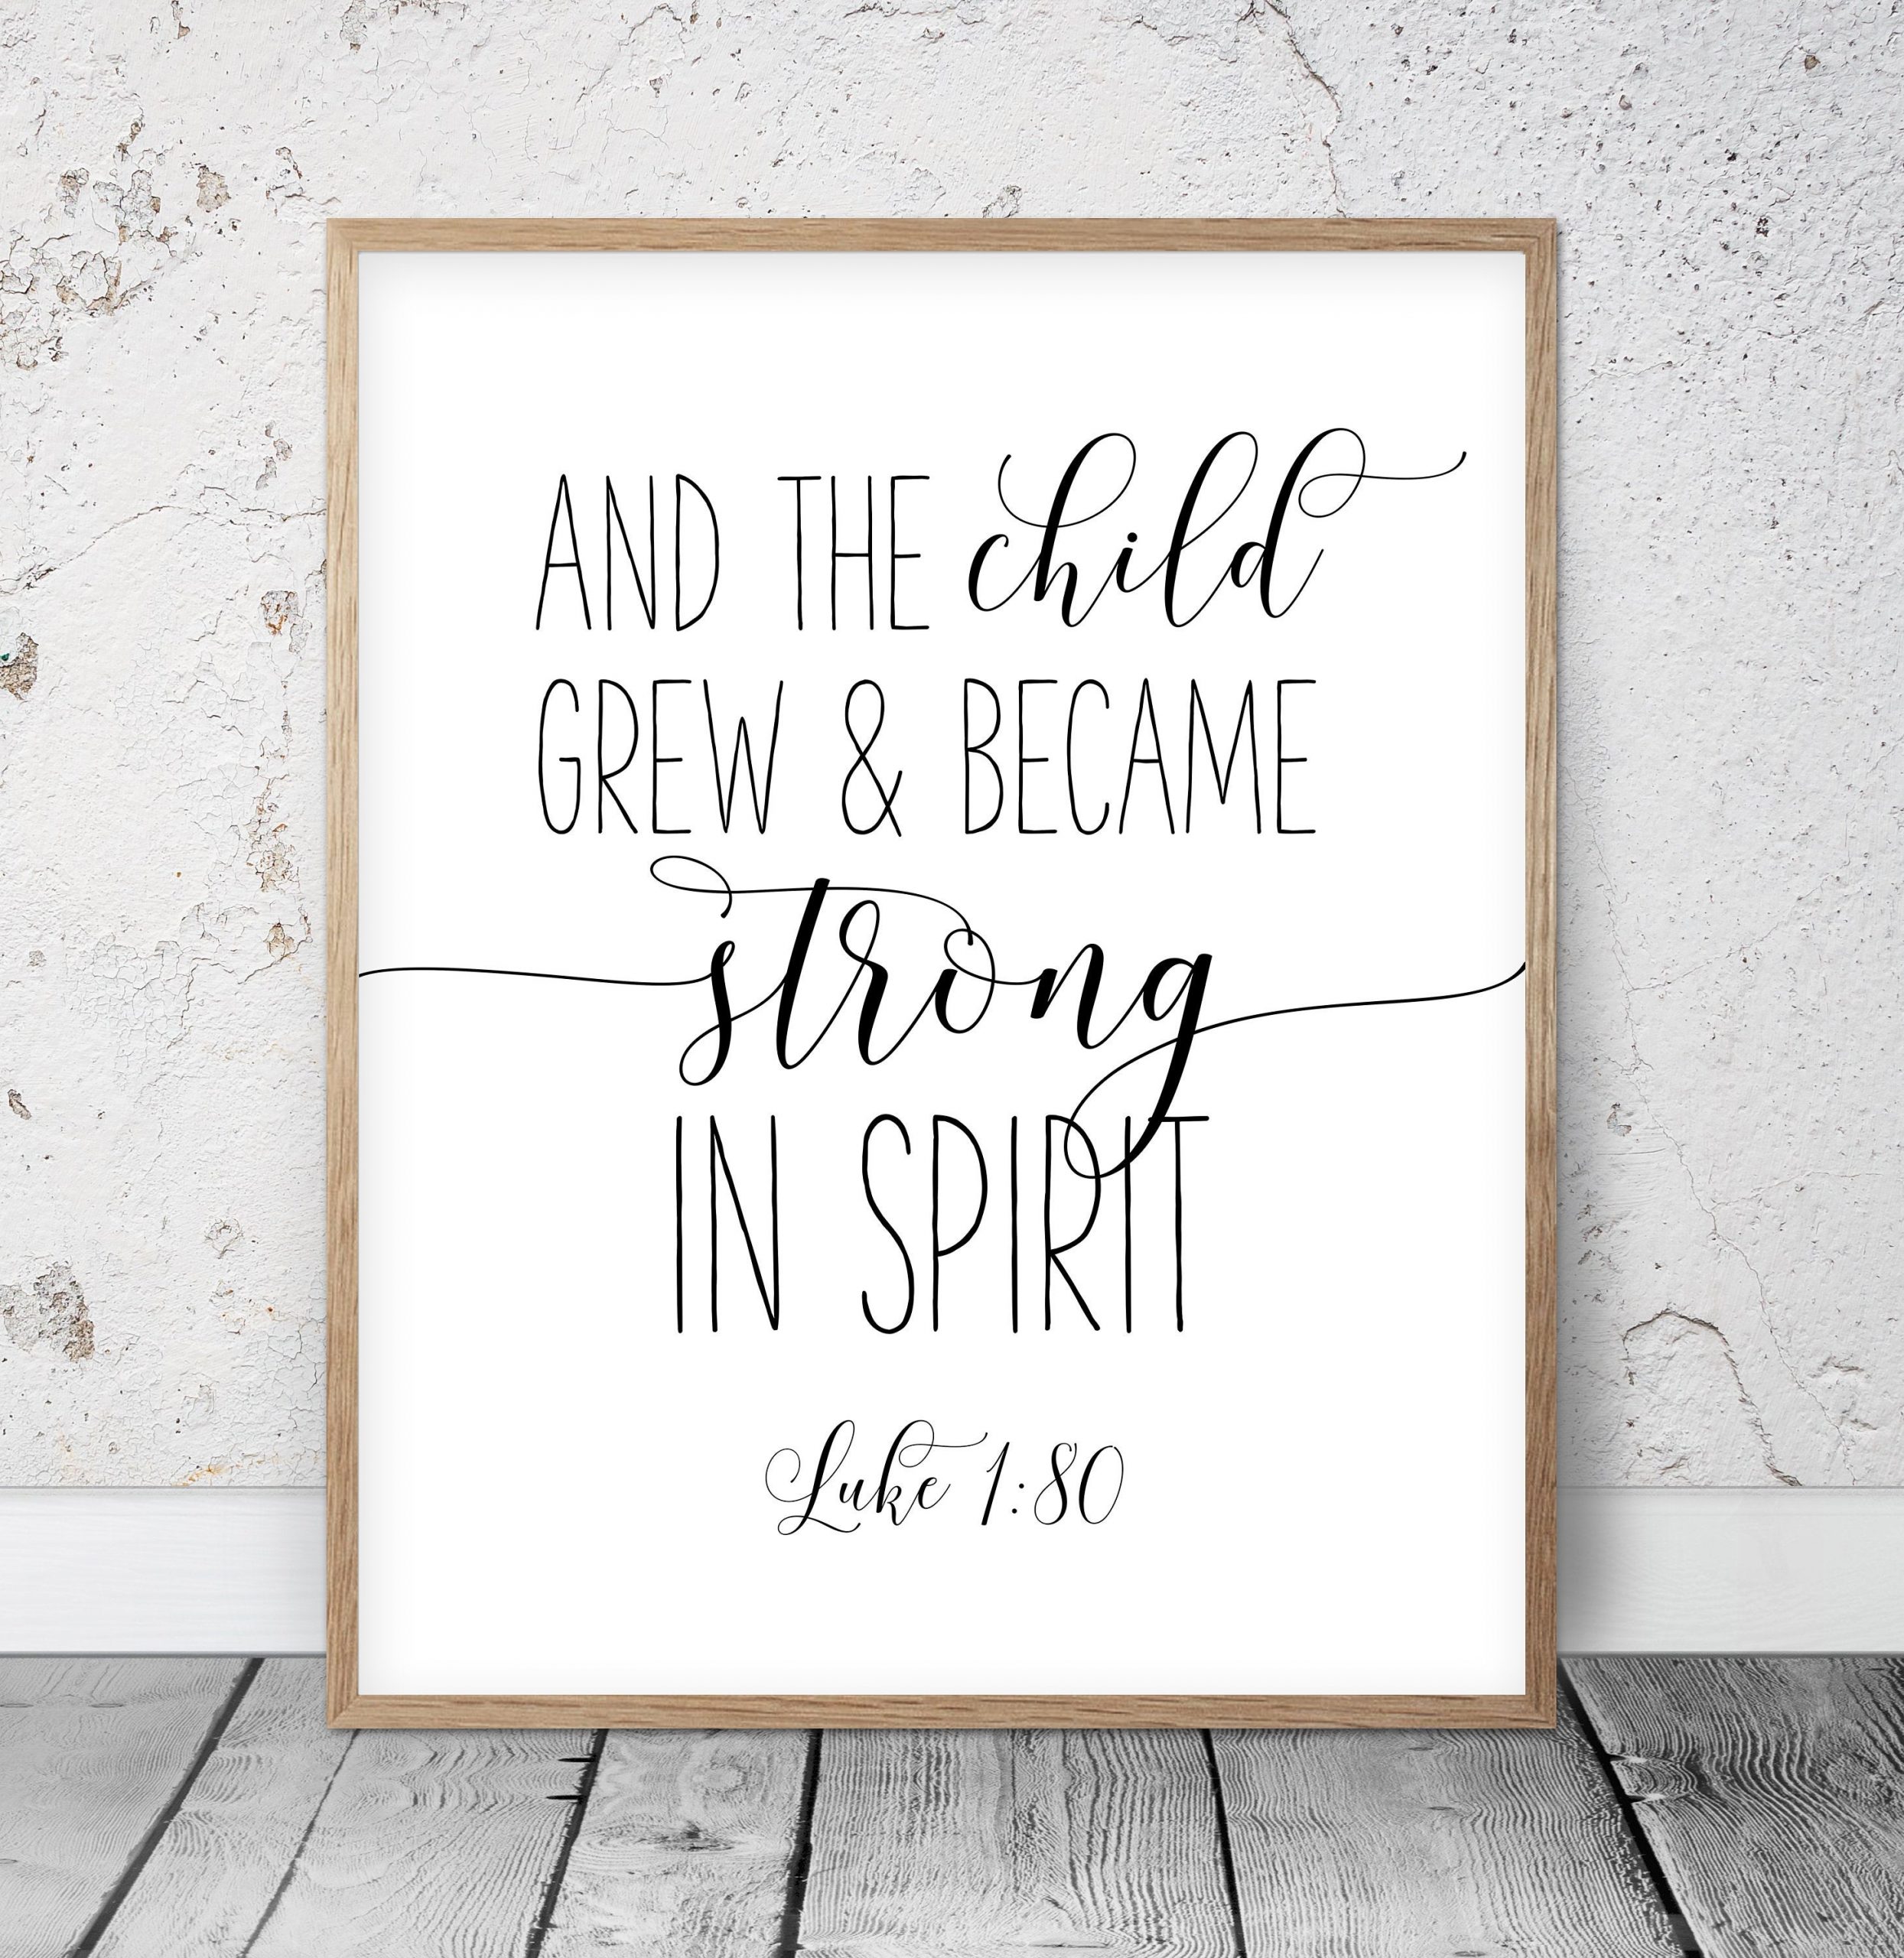 Scripture Printable And The Child Grew And Became Strong In Spirit, Luke 1:80, Bible Verse Wall Art